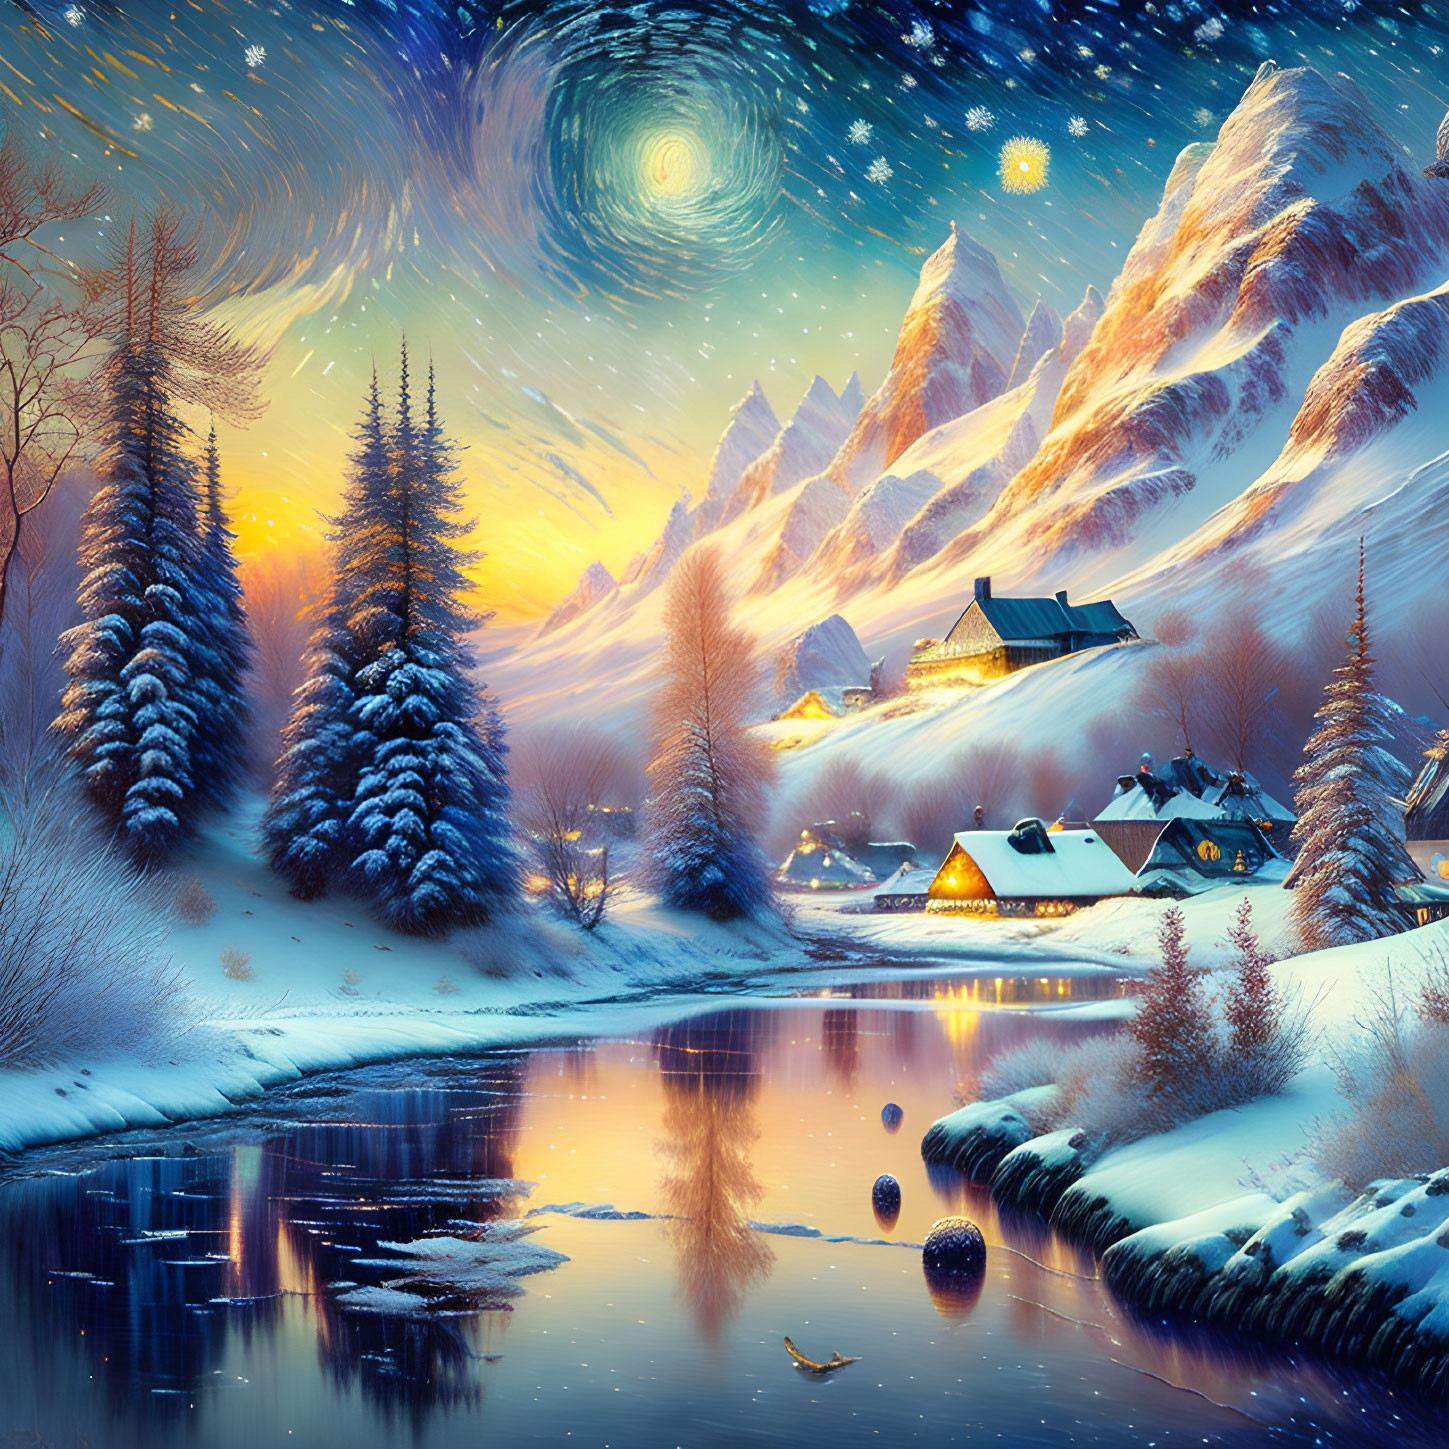  A cold and winter evening landscape